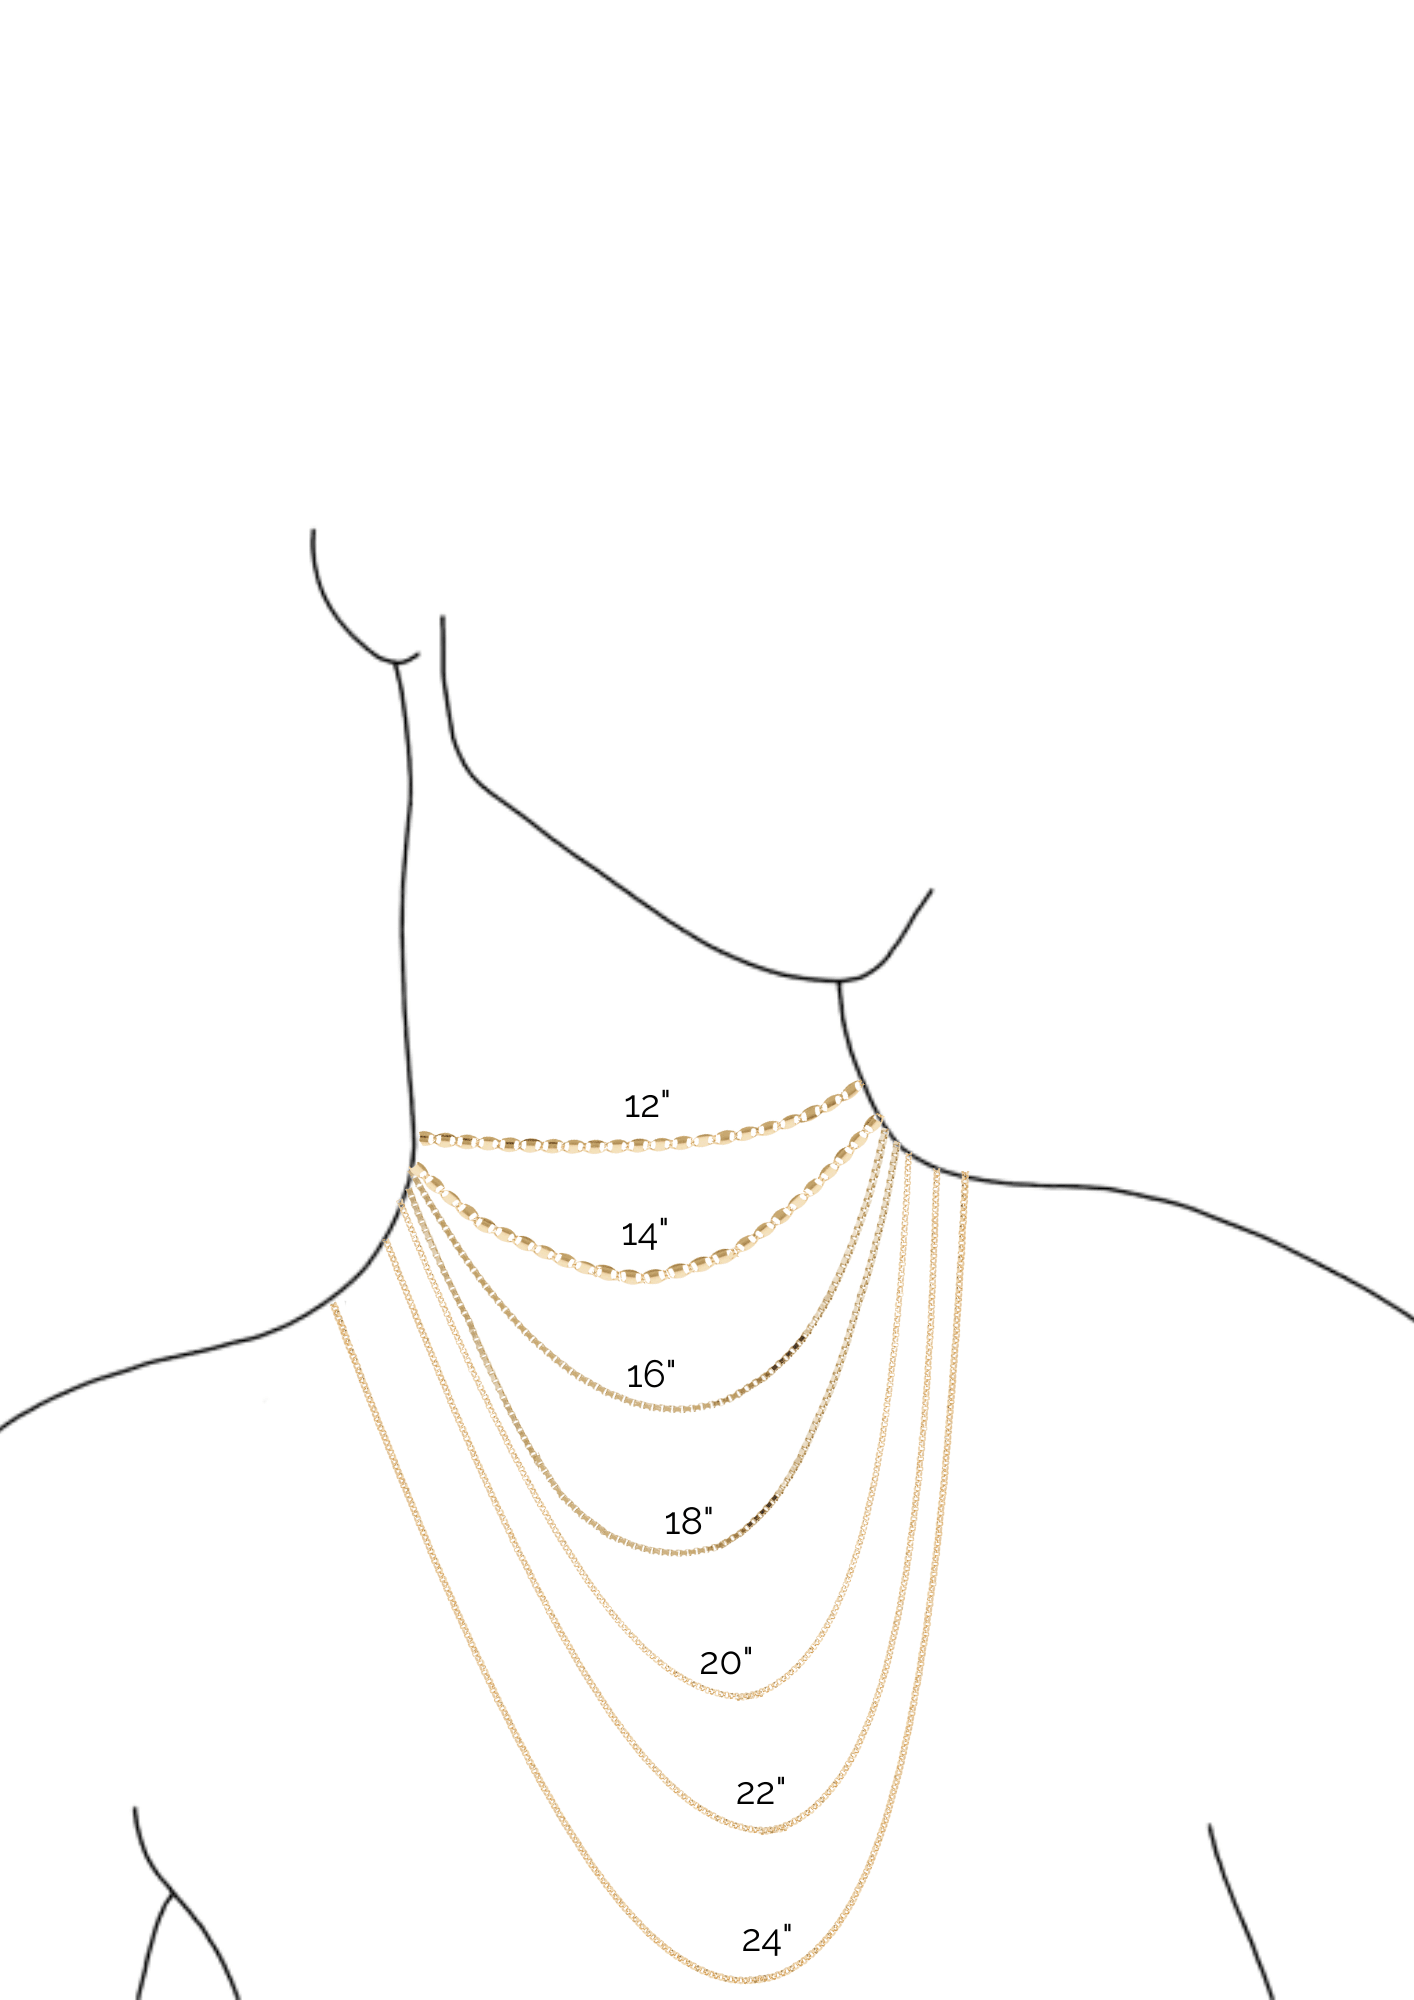 Necklace Length Guide: How Do I Choose the Right One? – Outhouse Jewellery